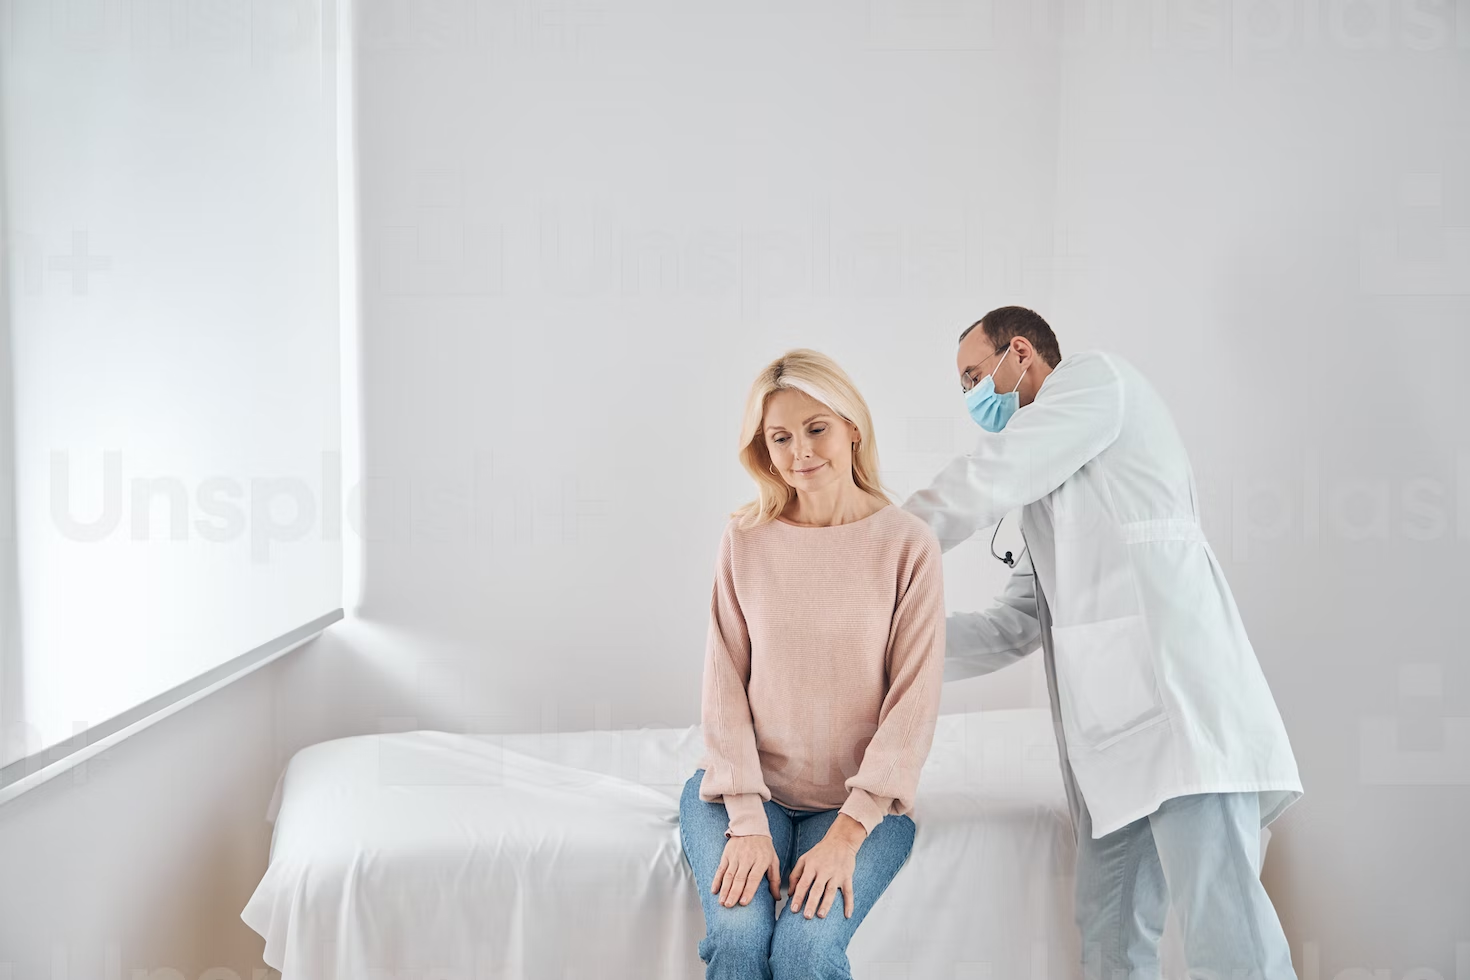  A woman during an appointment with her doctor